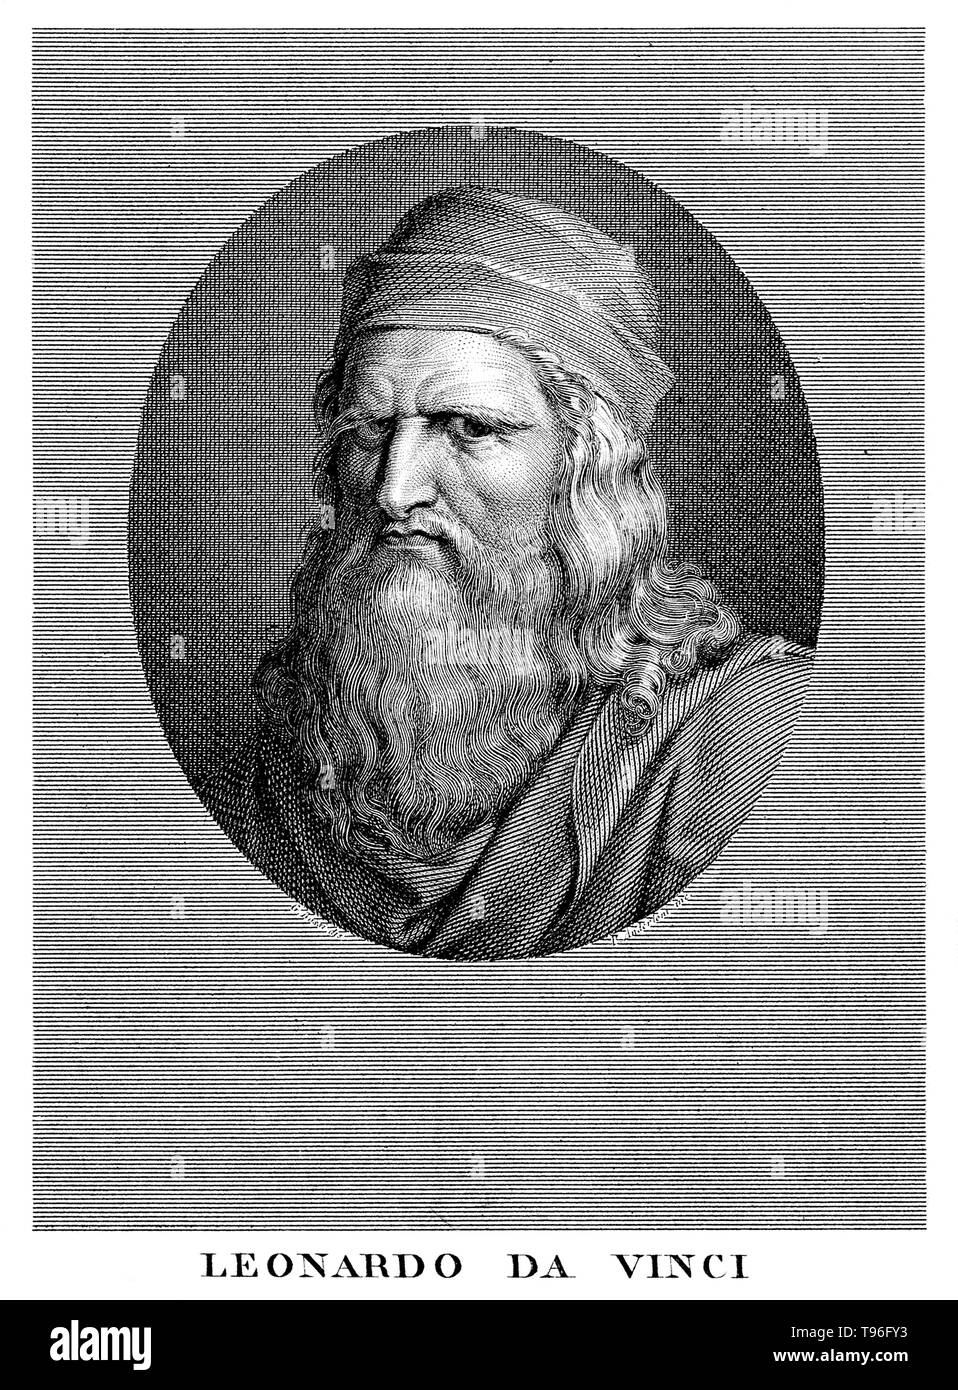 Leonardo di ser Piero da Vinci (April 15, 1452 - May 2, 1519) was an Italian Renaissance polymath: painter, sculptor, architect, musician, mathematician, engineer, inventor, anatomist, geologist, cartographer, botanist, and writer. His genius, perhaps more than that of any other figure, epitomized the Renaissance humanist ideal, often been described as the archetype of the Renaissance Man.  Line engraving by Pietro Anderloni after Giuseppe Bossi, undated. Stock Photo